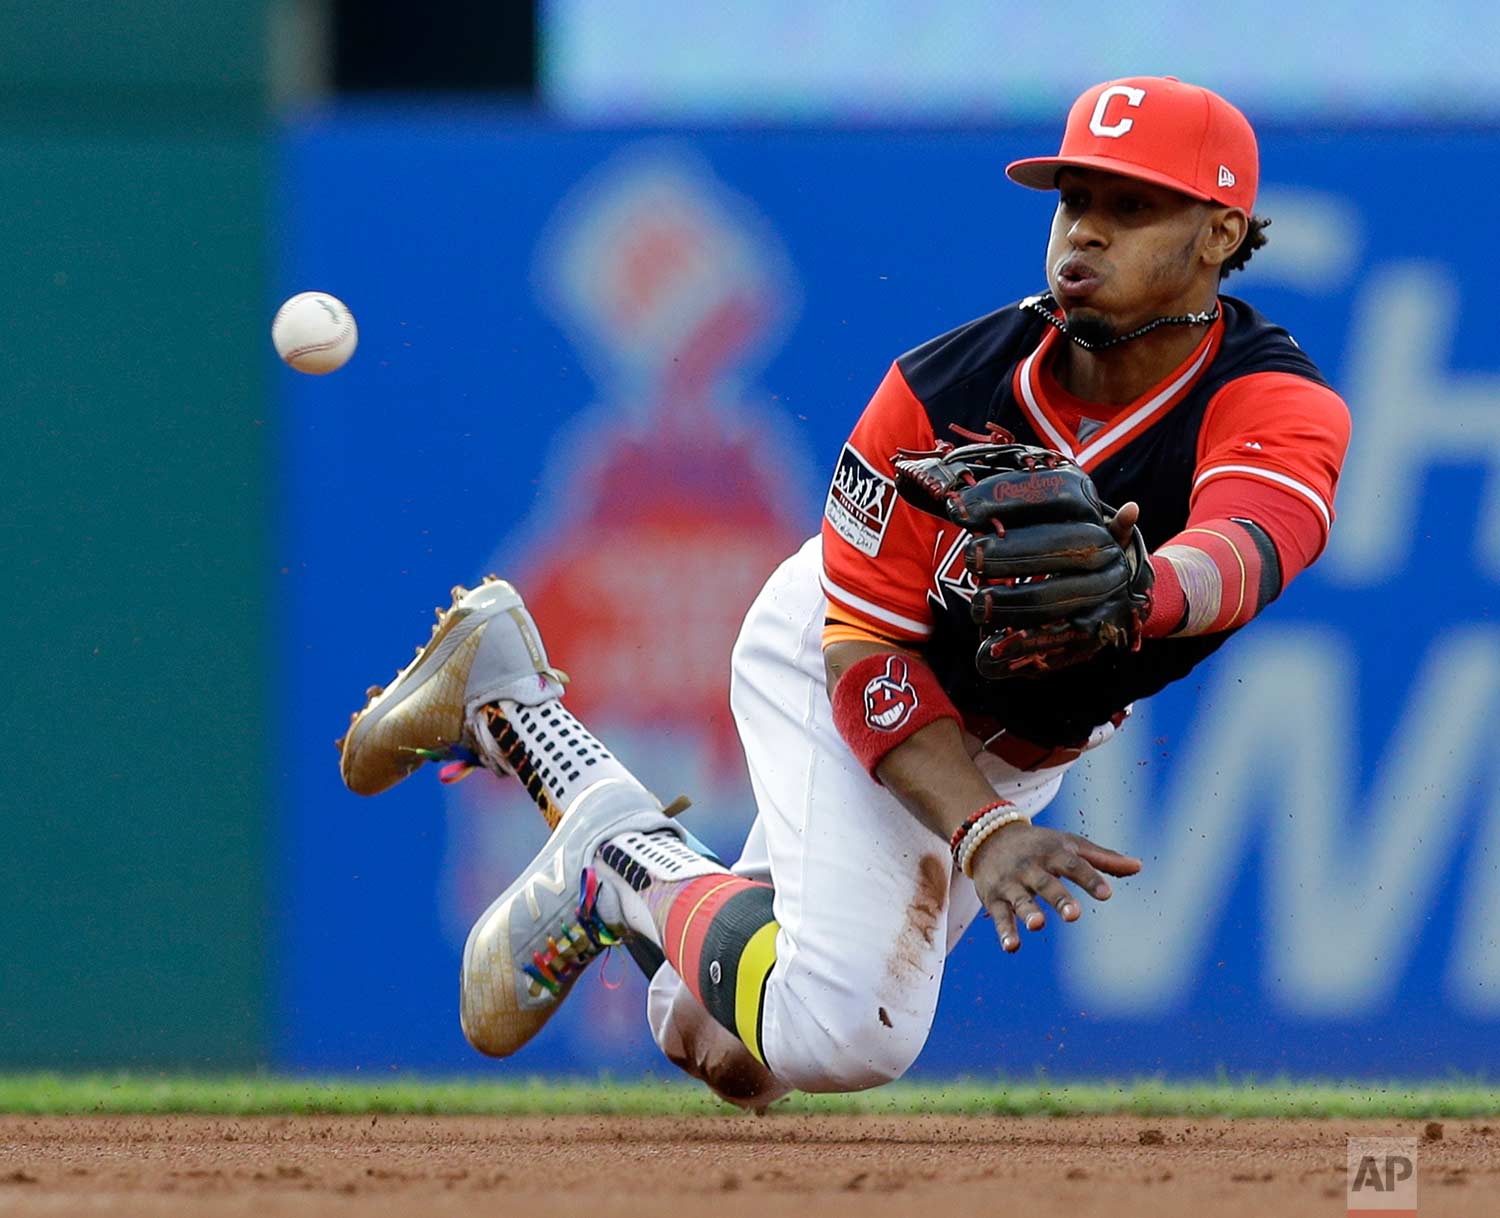  Cleveland Indians' Francisco Lindor tosses the ball from his mitt to second baseman Jose Ramirez to get Kansas City Royals' Lorenzo Cain out at second base during the first inning of a baseball game, Friday, Aug. 25, 2017, in Cleveland. (AP Photo/To